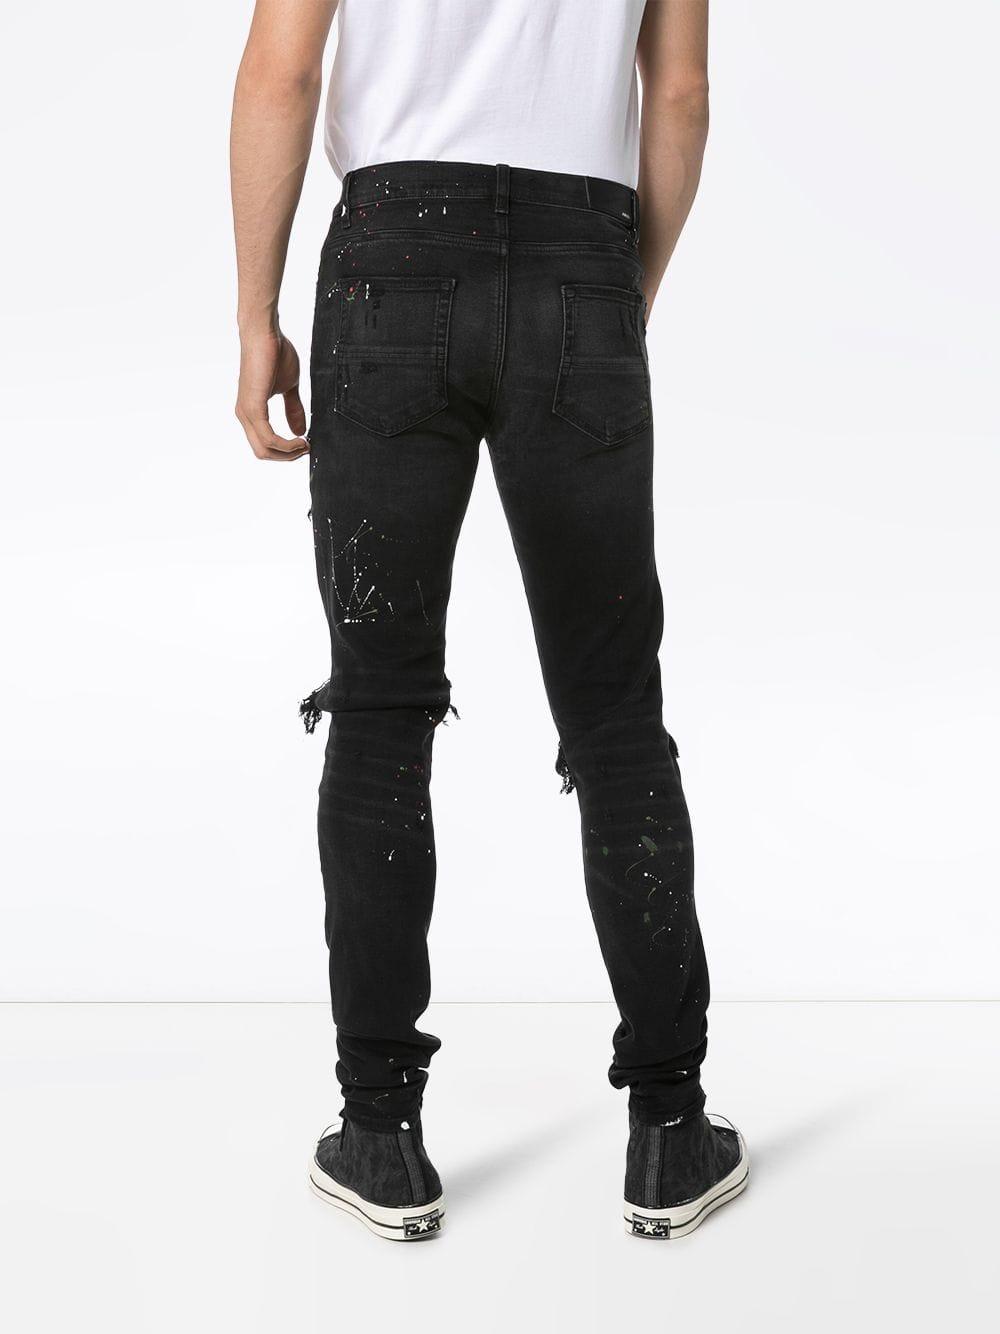 Amiri Distressed Patch-embroidered Jeans in Black for Men - Lyst